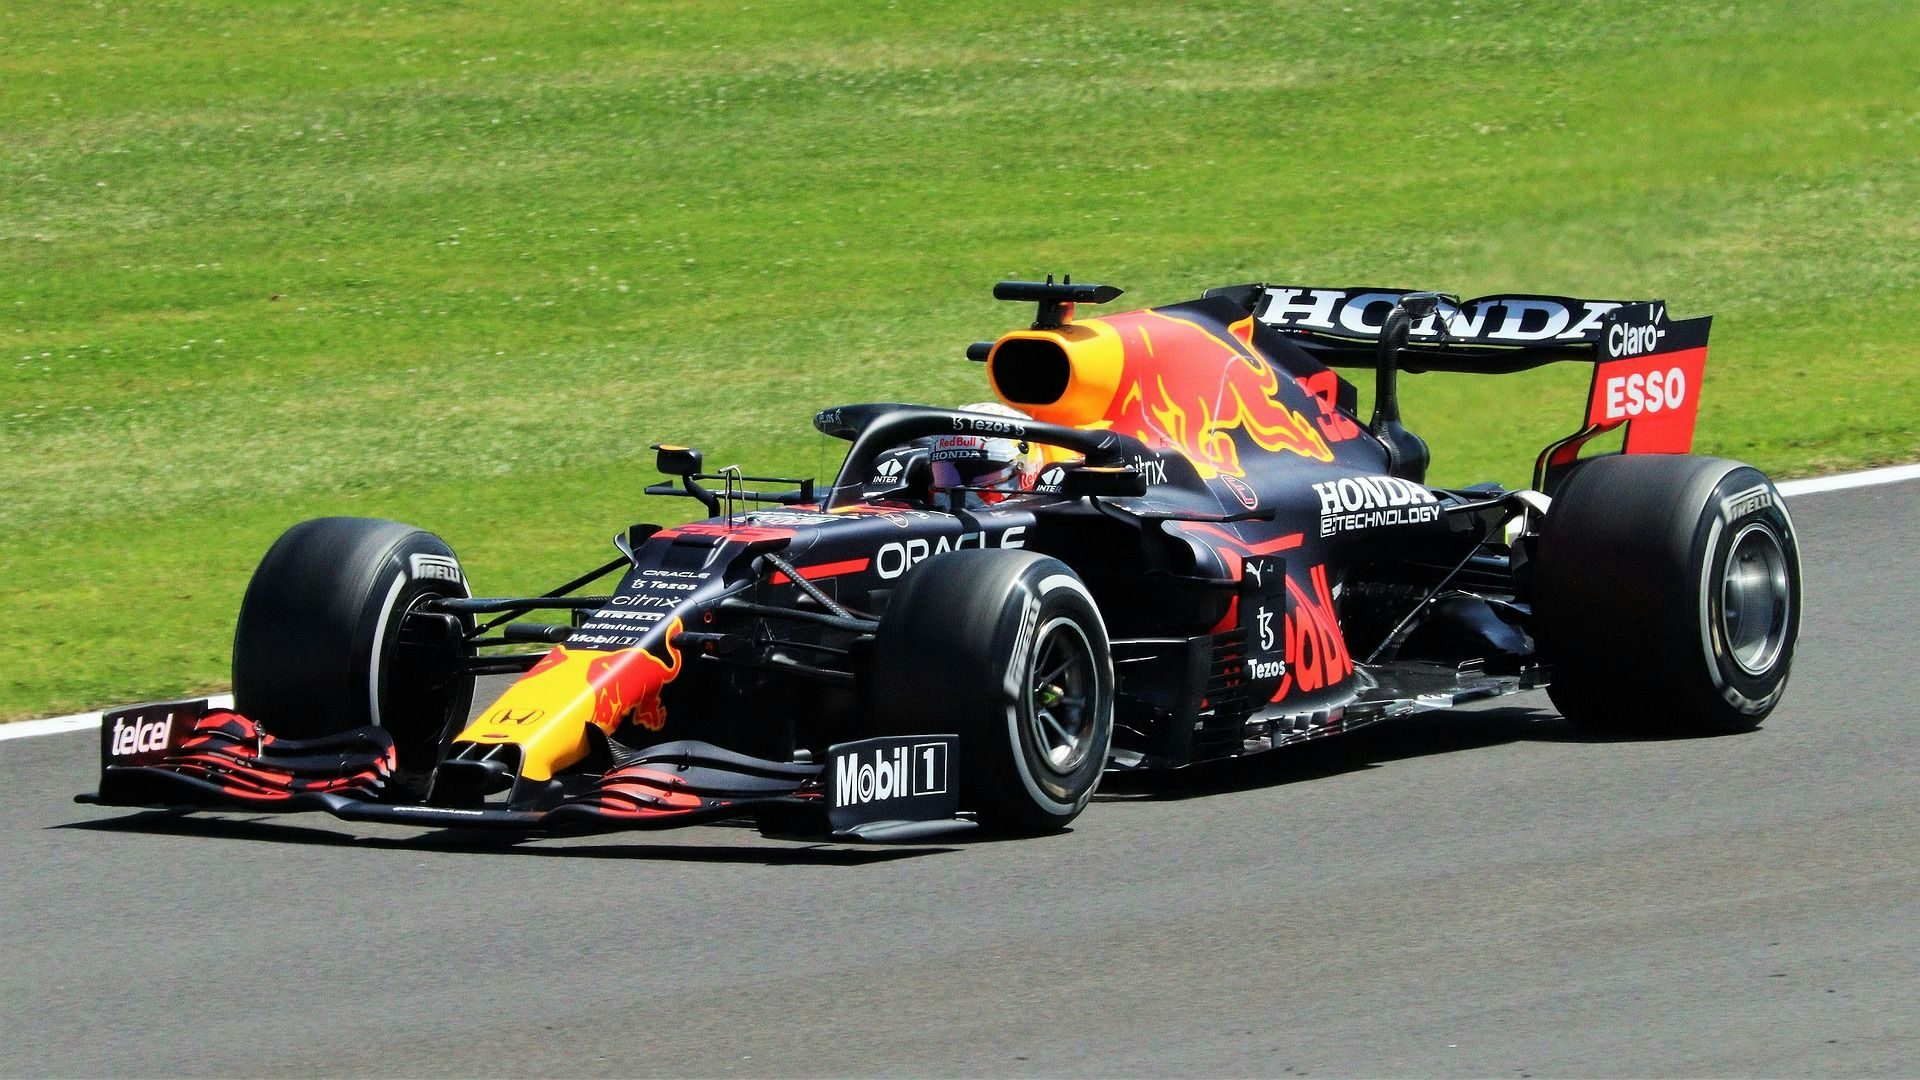 What will happen in the F1 Chinese Grand Prix this weekend? Tell us for $4!